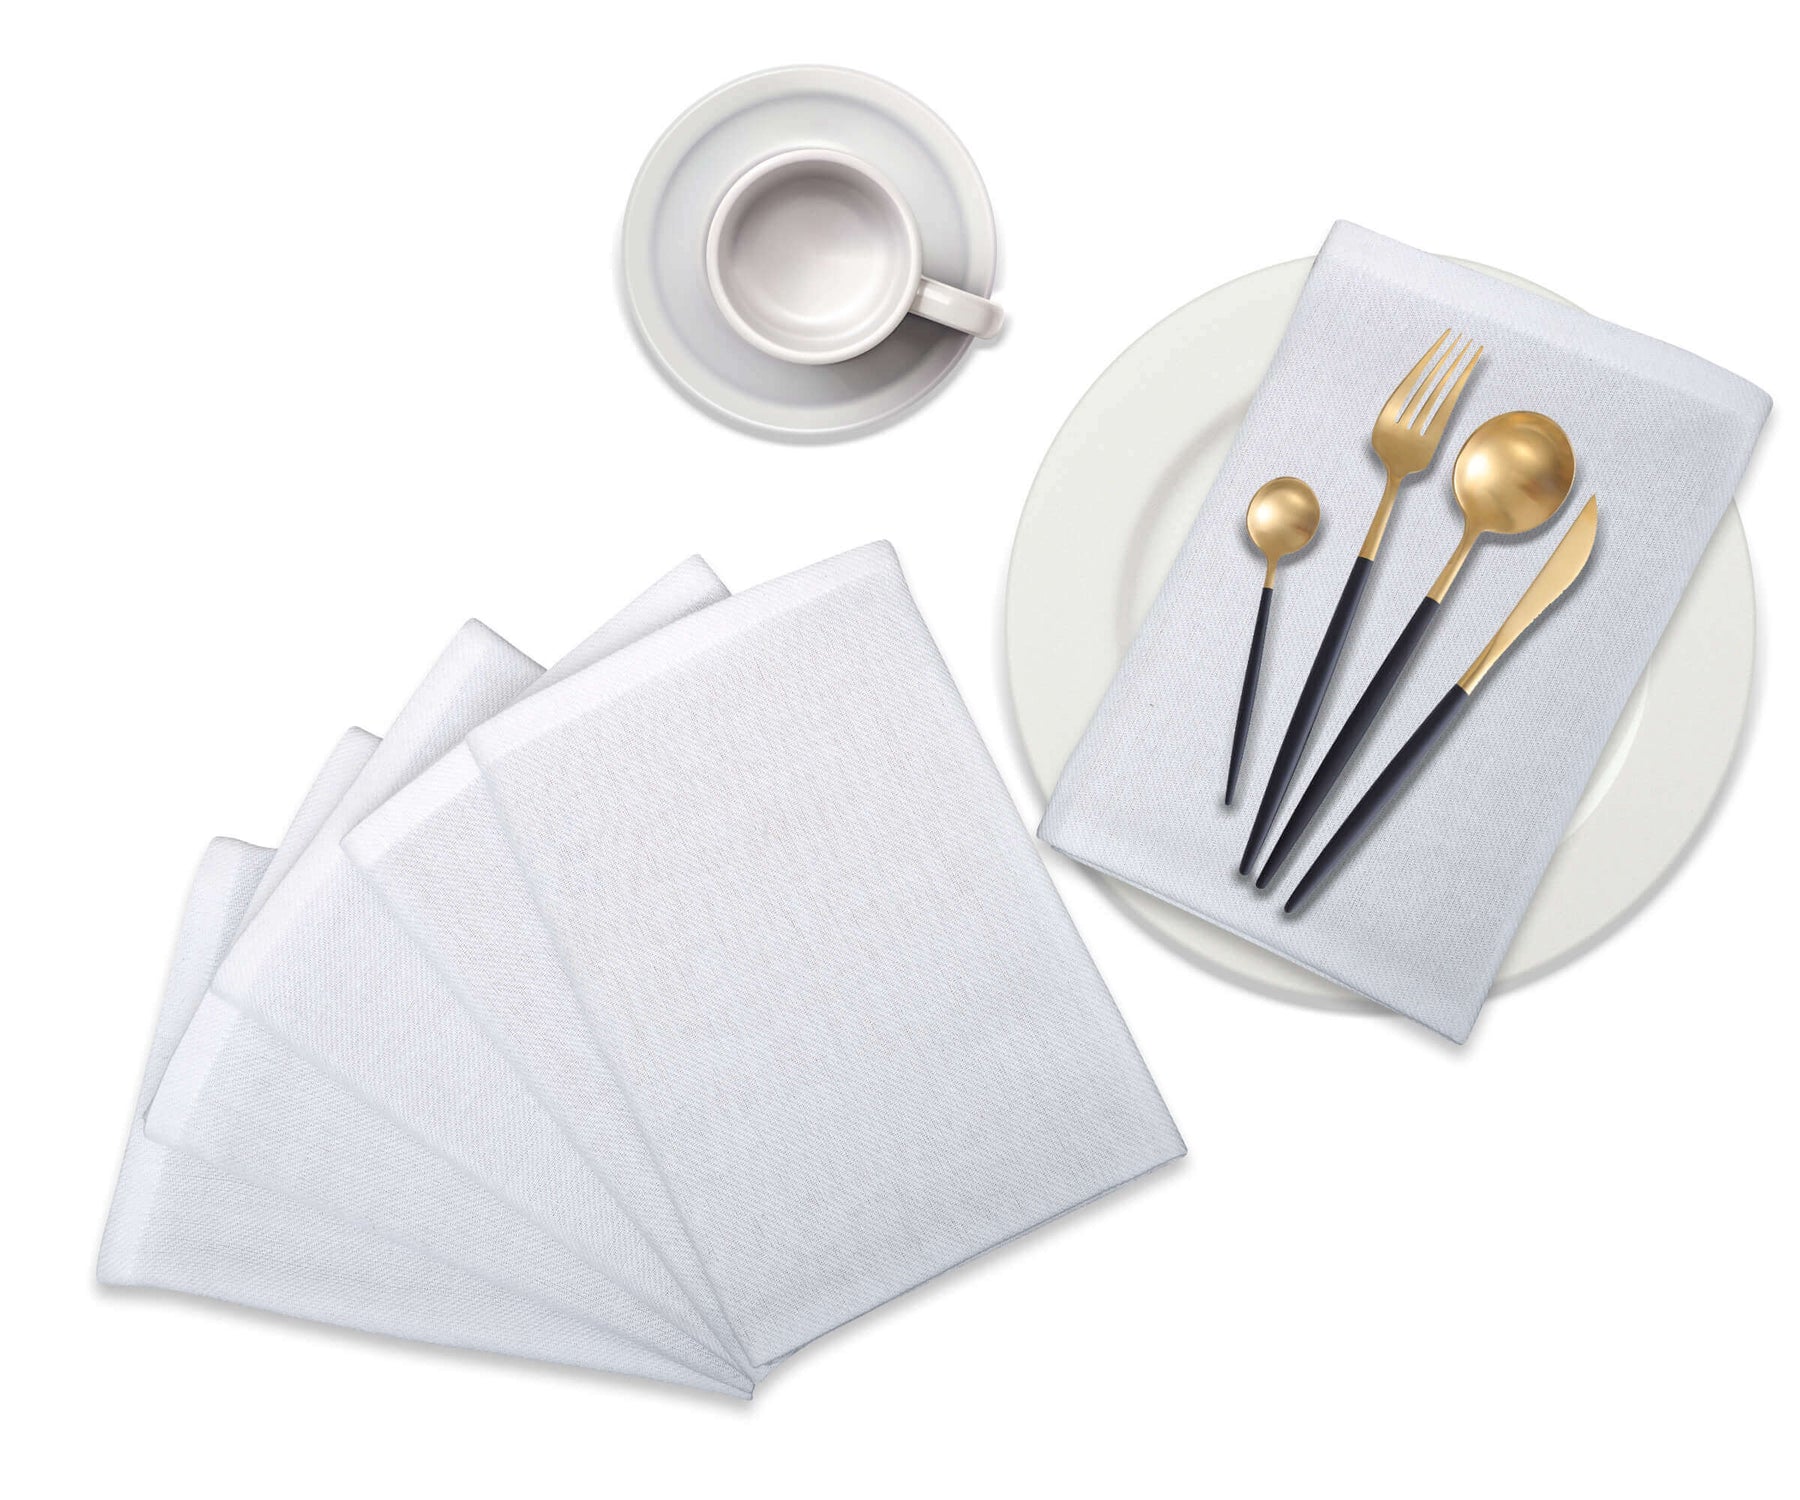 Folded white napkins with borders are placed on the table with a spoon.